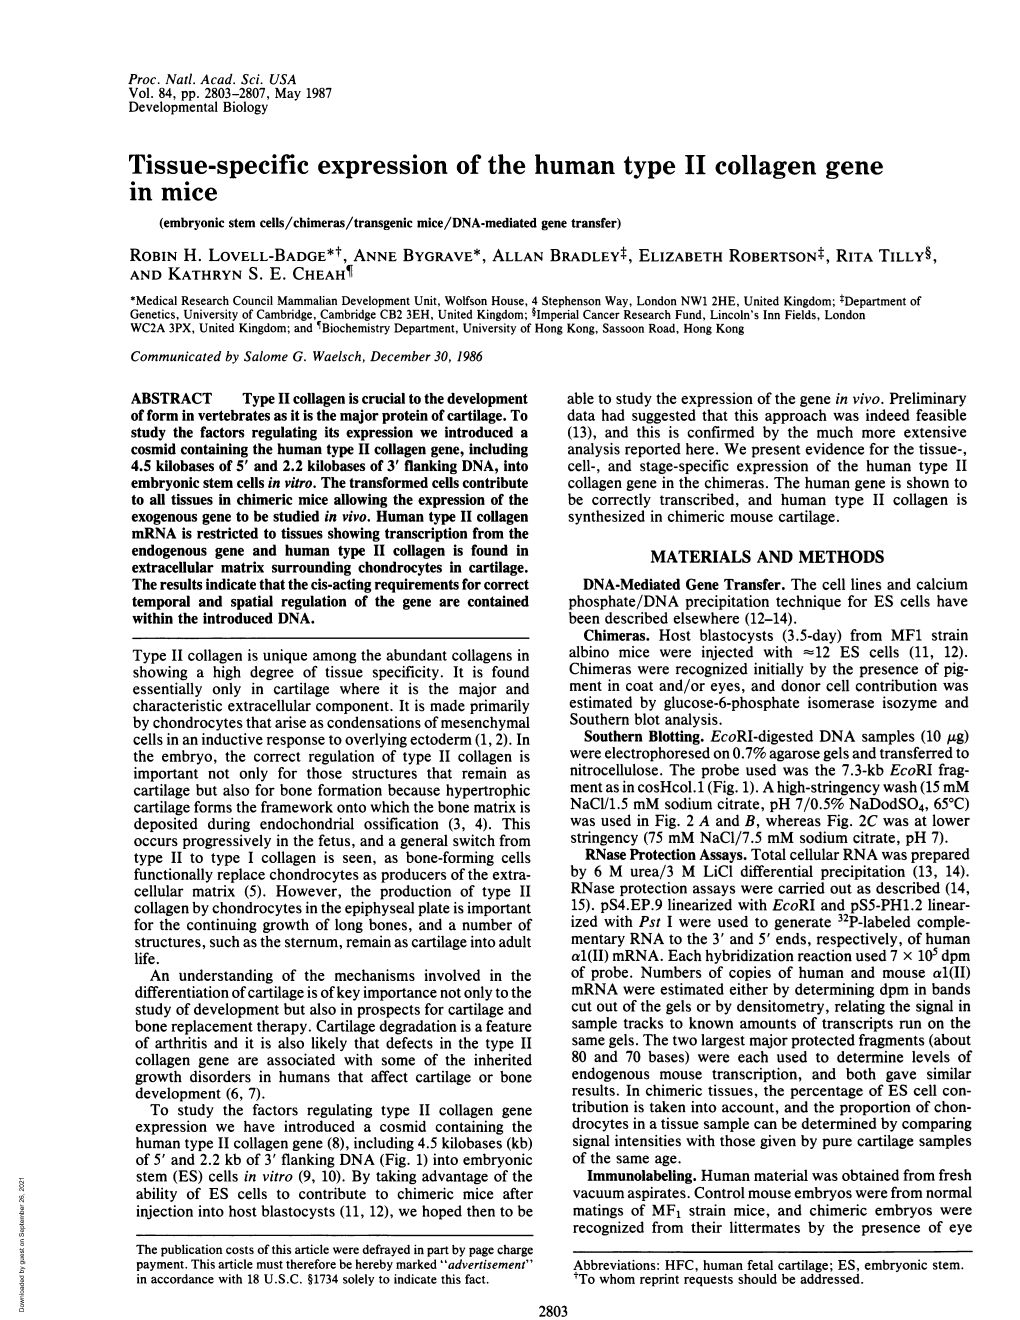 Tissue-Specific Expression of the Human Type II Collagen Gene in Mice (Embryonic Stem Cells/Chimeras/Transgenic Mice/DNA-Mediated Gene Transfer) ROBIN H